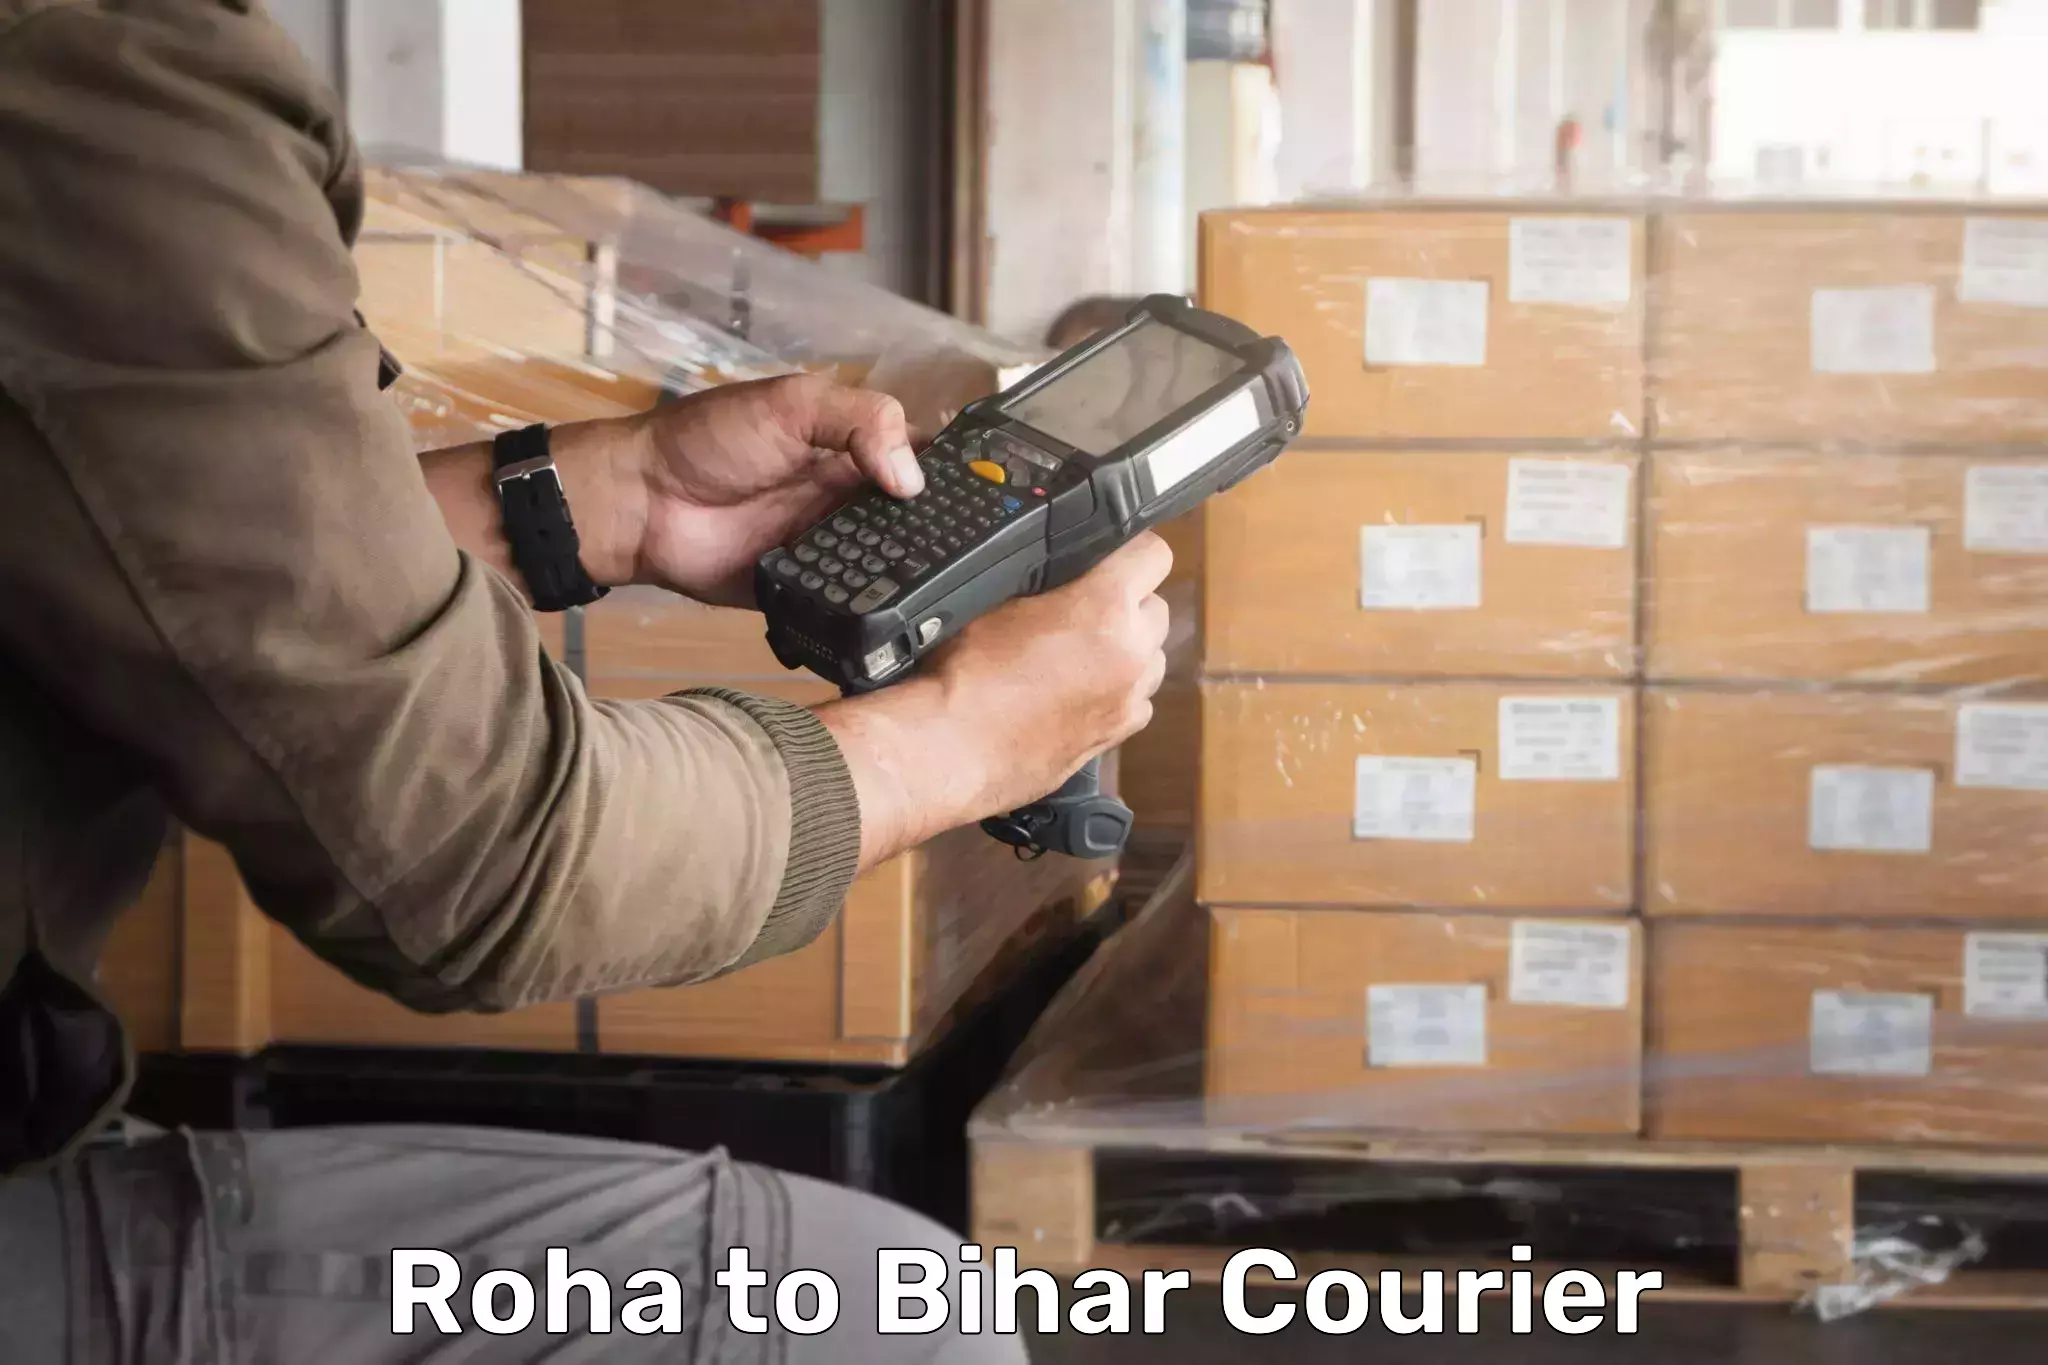 Cash on delivery service Roha to Chakai